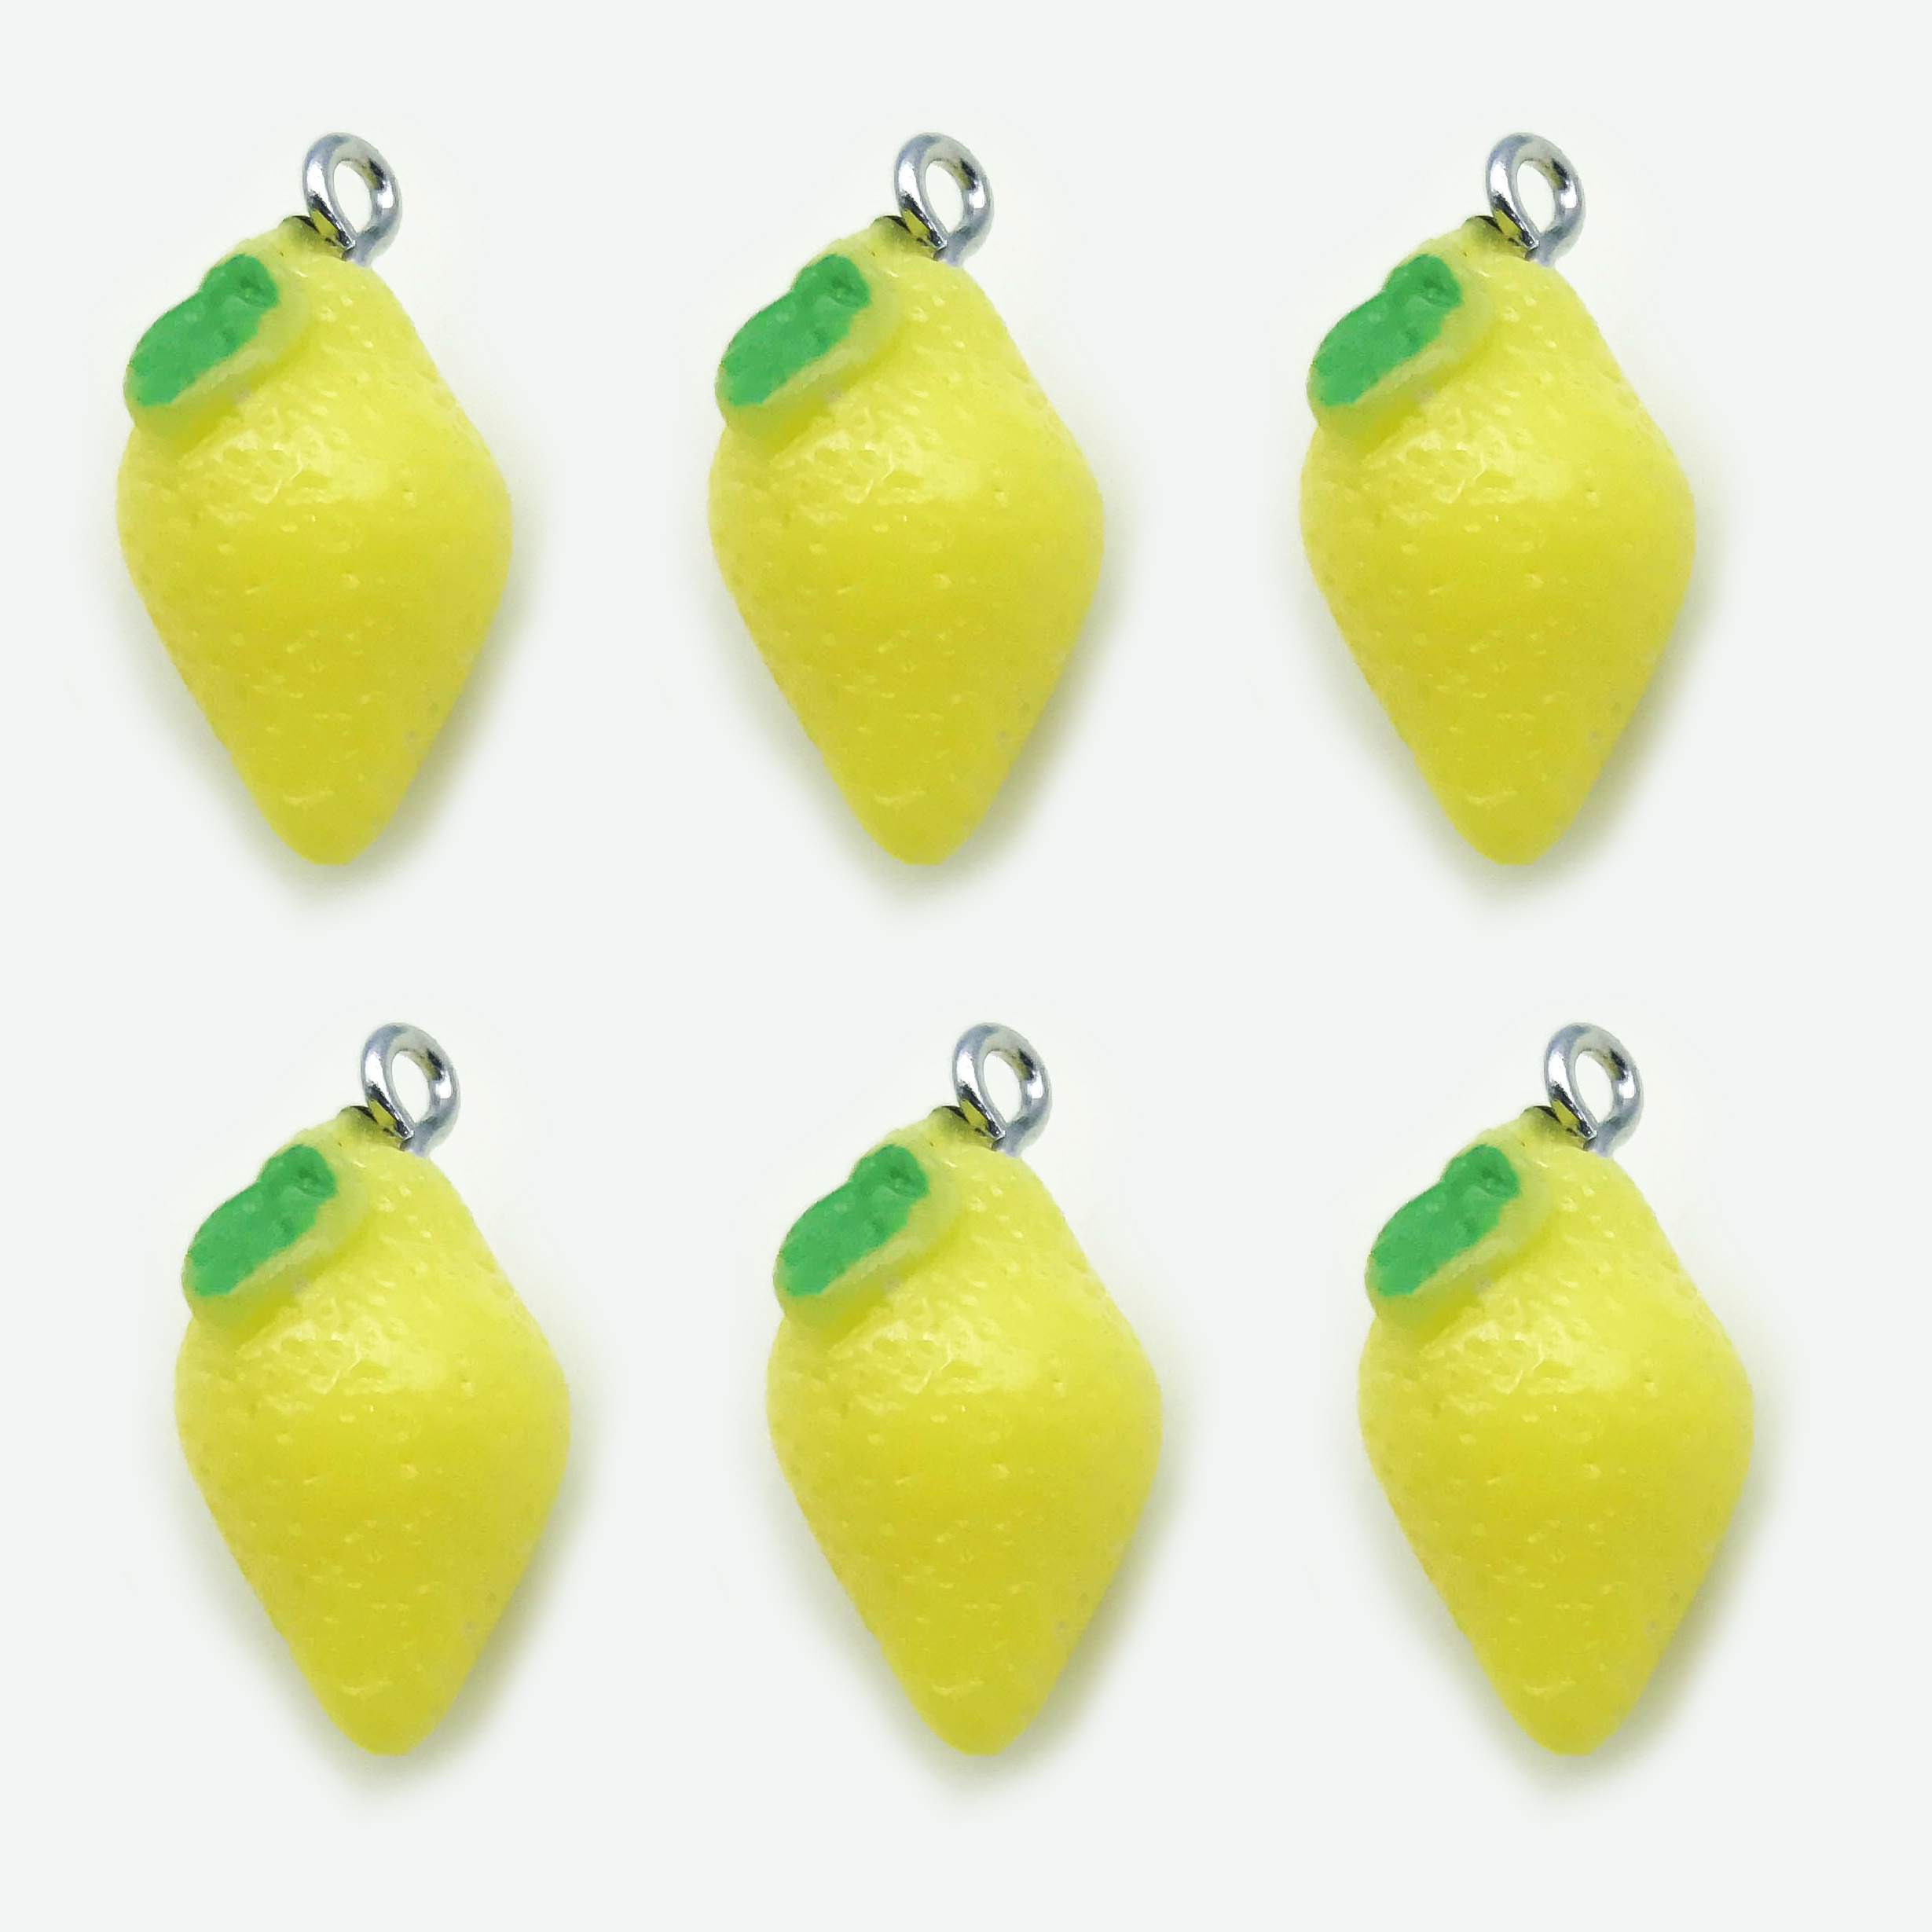 SUNNYCLUE 1 Box 20Pcs Resin Fruit Pendant Charms 3D Fruit Charms Strawberry  Banana Charms for DIY Earring Necklace Bracelet Keychain Scrapbooking